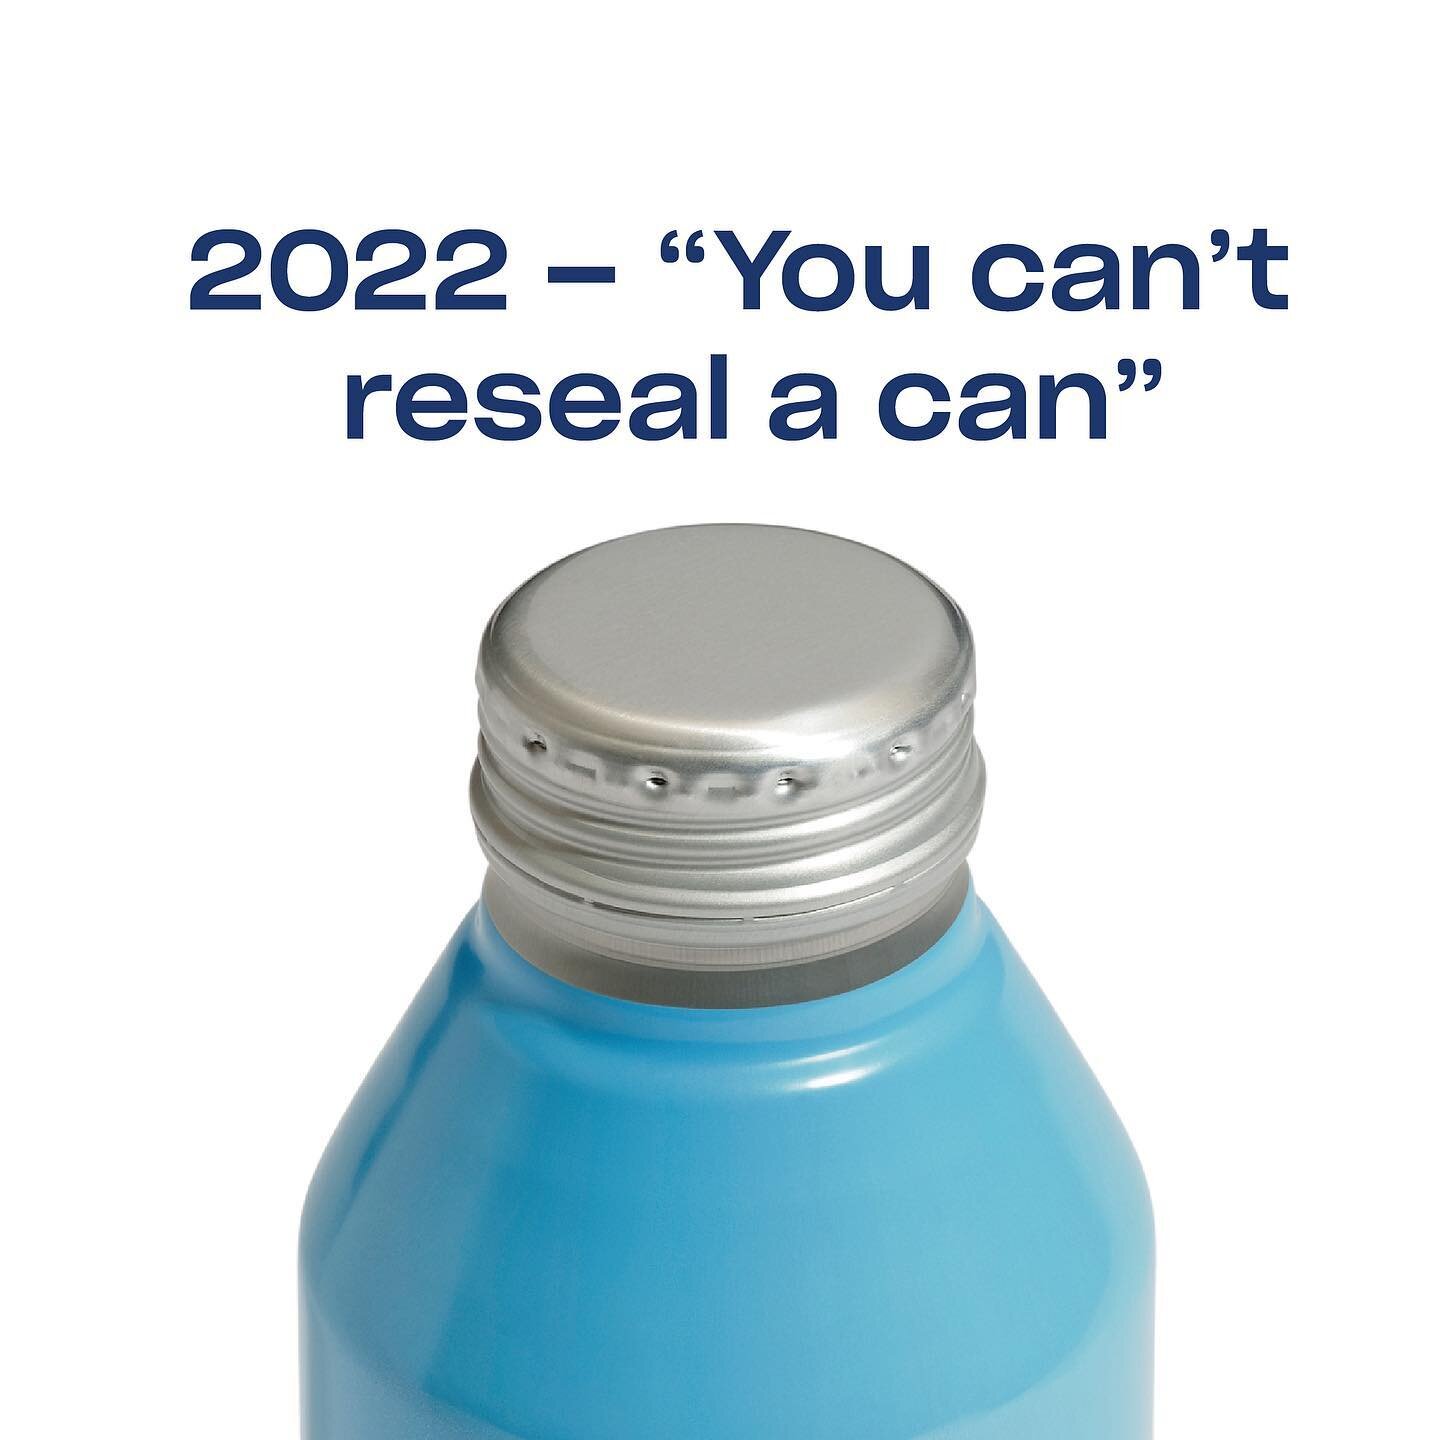 Welcome to 2023; aluminium cans are resealable and refillable.

Meet our 100% recyclable aluminum bottle-can / twist top / deal sealer / plastic killer.

#futureisnow #cannedwater #2023 #australianmade